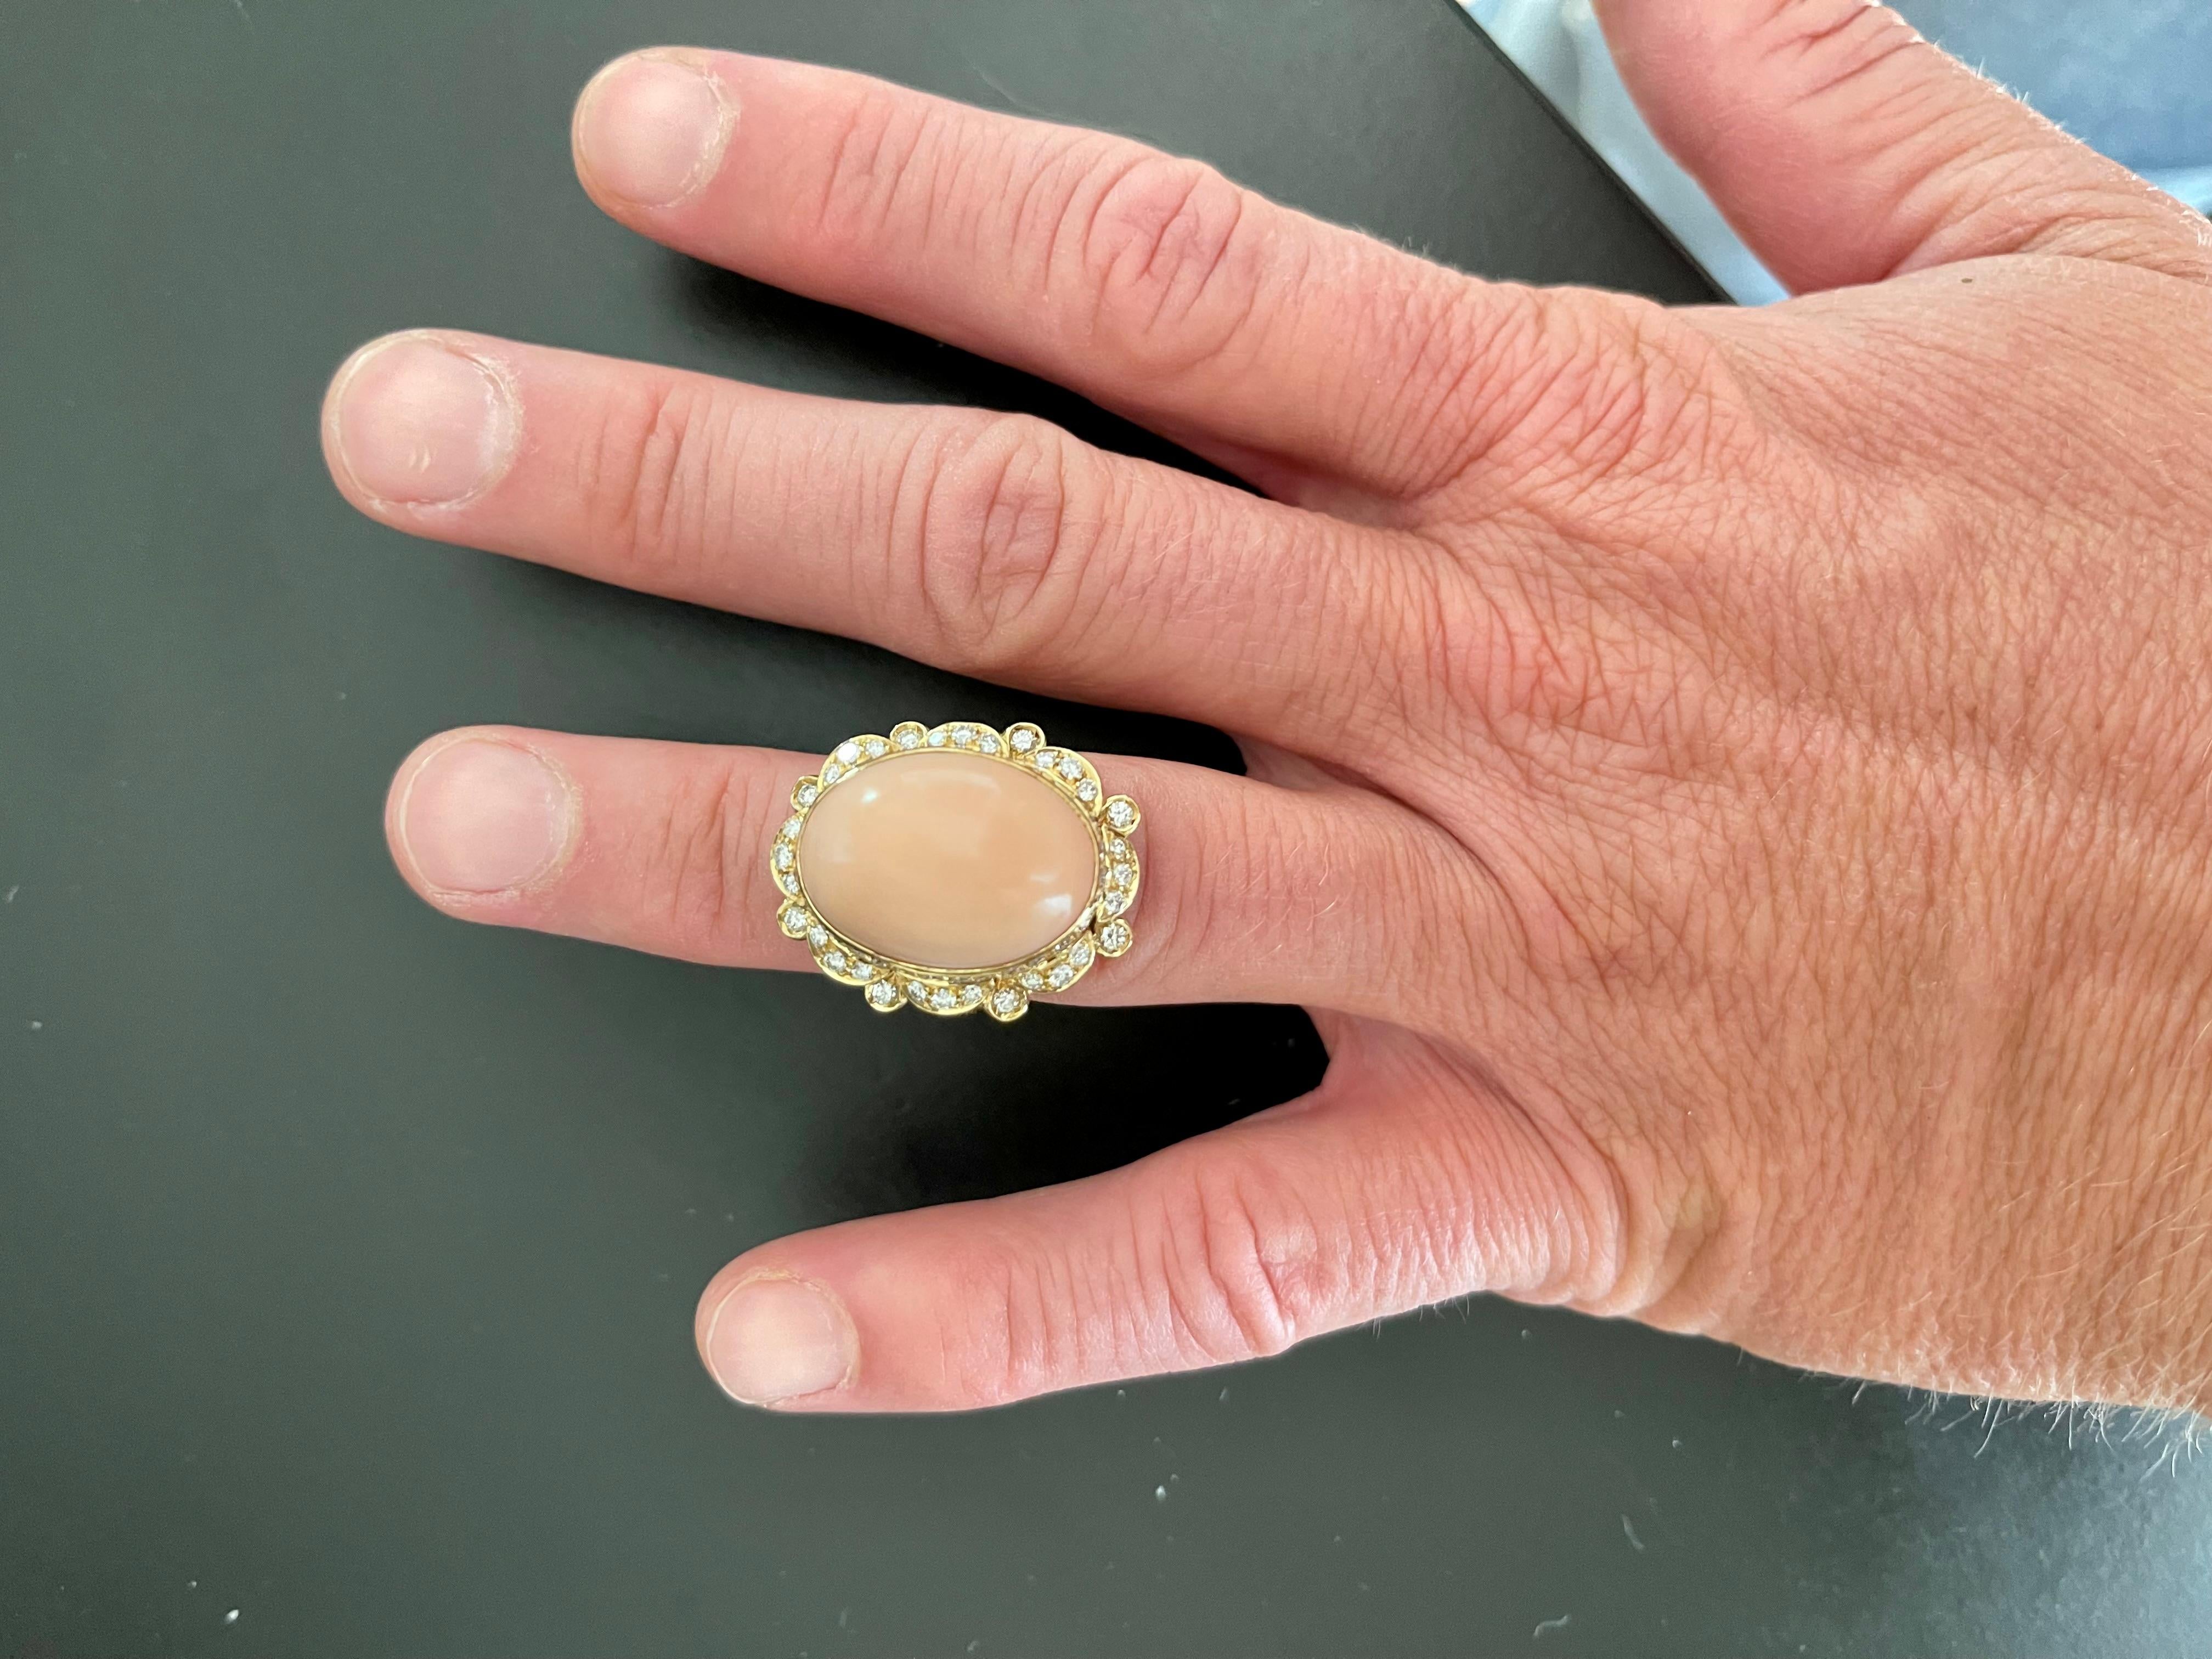 18 K Yellow Gold Vintage Cocktail Ring with Diamonds Angel Skin Coral For Sale 3